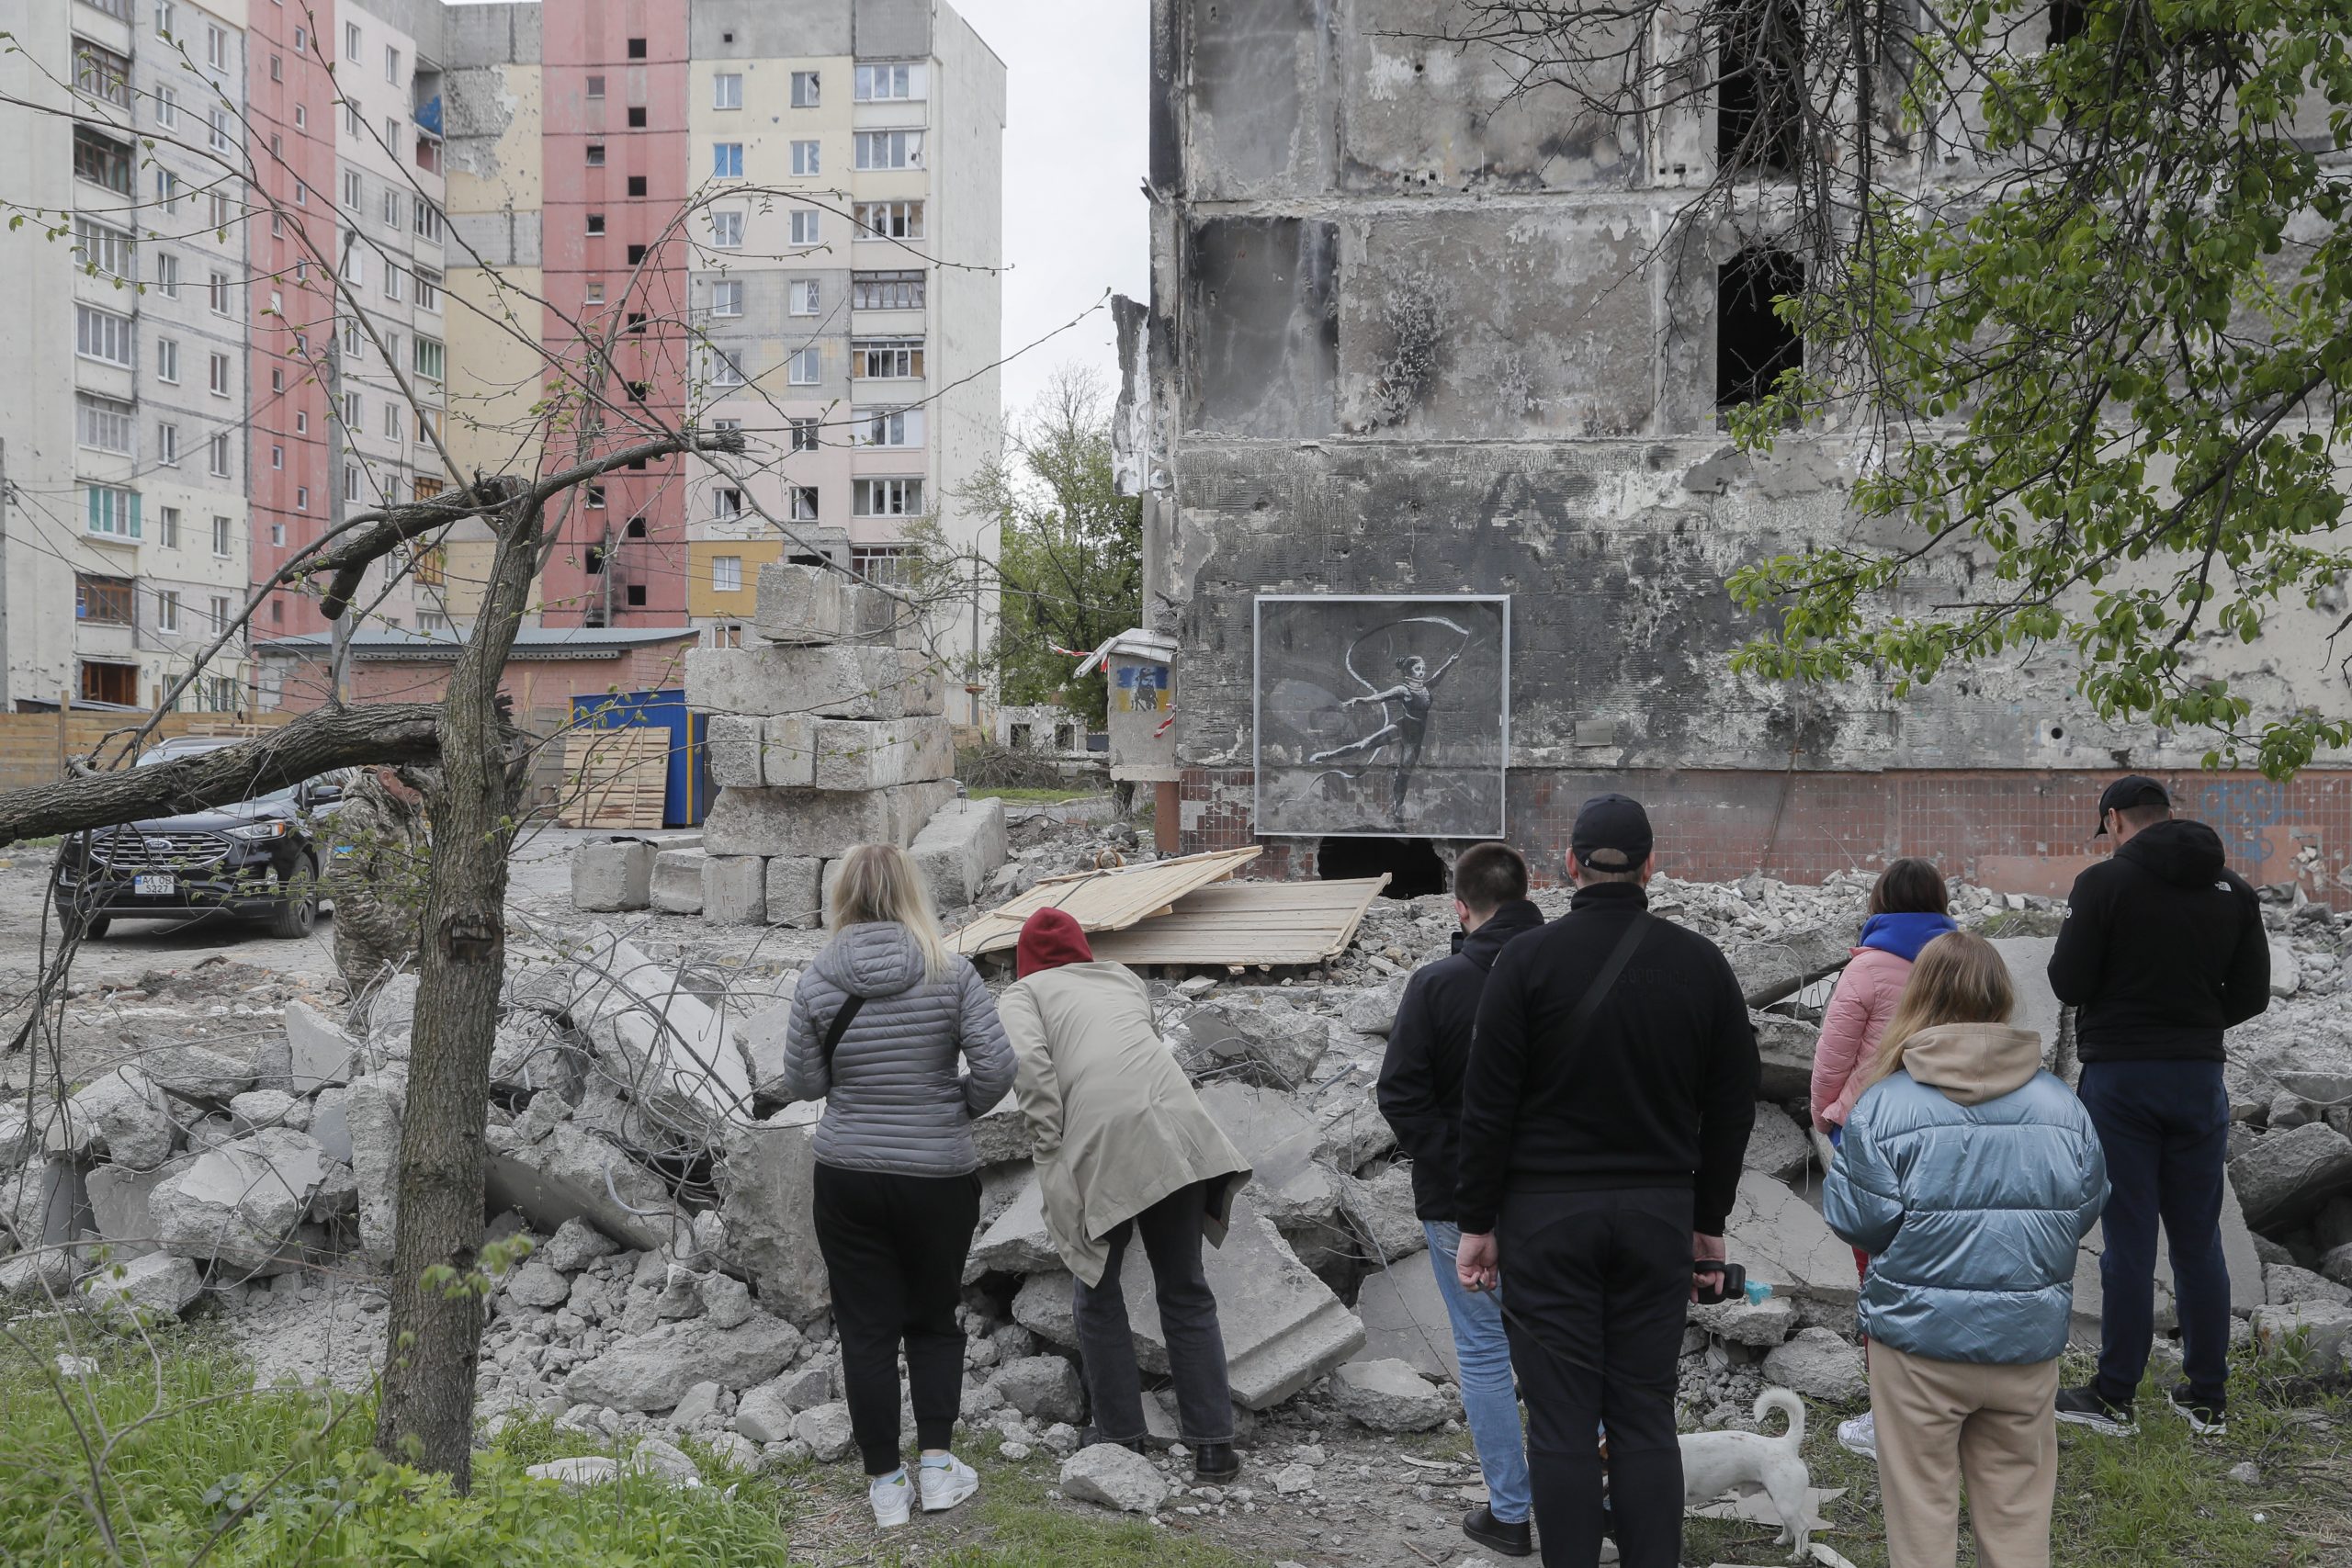 epa10600226 People stand in front of a Banksy mural covered by plastic glass on a damaged building during demolishing works in Irpin near Kyiv, Ukraine, 30 April 2023. Authorities are demolishing two residential buildings as they were damaged by shelling during the Russian attacks on Irpin. A section of one of the two buildings, with a mural created by British street artist Banksy and depicting a rhythmic gymnast wearing a neck brace, will be preserved. Irpin, along with other towns and villages in the northern part of the Kyiv region, were heavily shelled when Russian troops tried to reach the Ukrainian capital between February and March 2022.  EPA/SERGEY DOLZHENKO